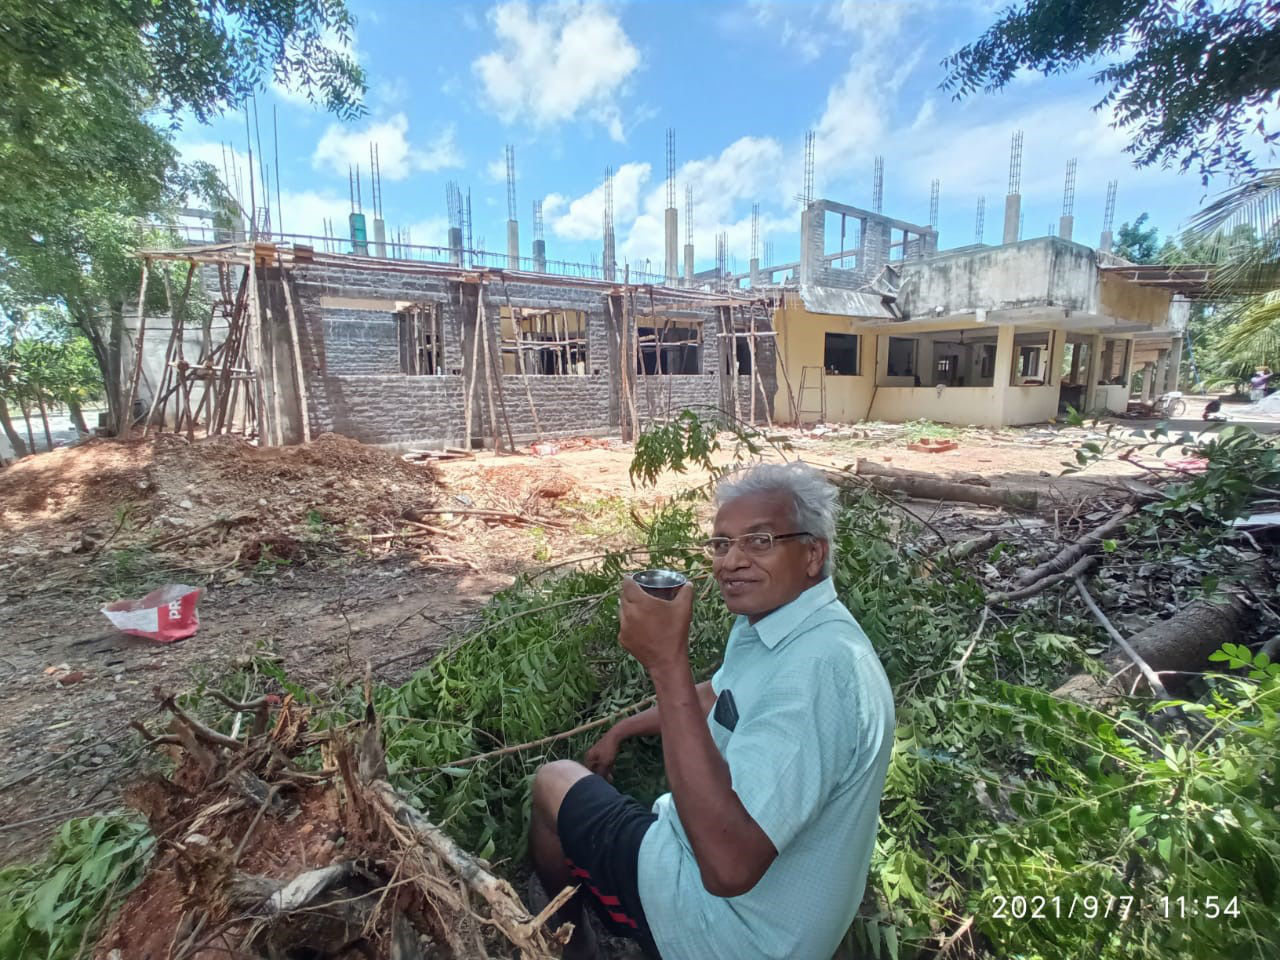 Fr. Thomas oversees the reconstruction and expansion of the Vellore Hospice